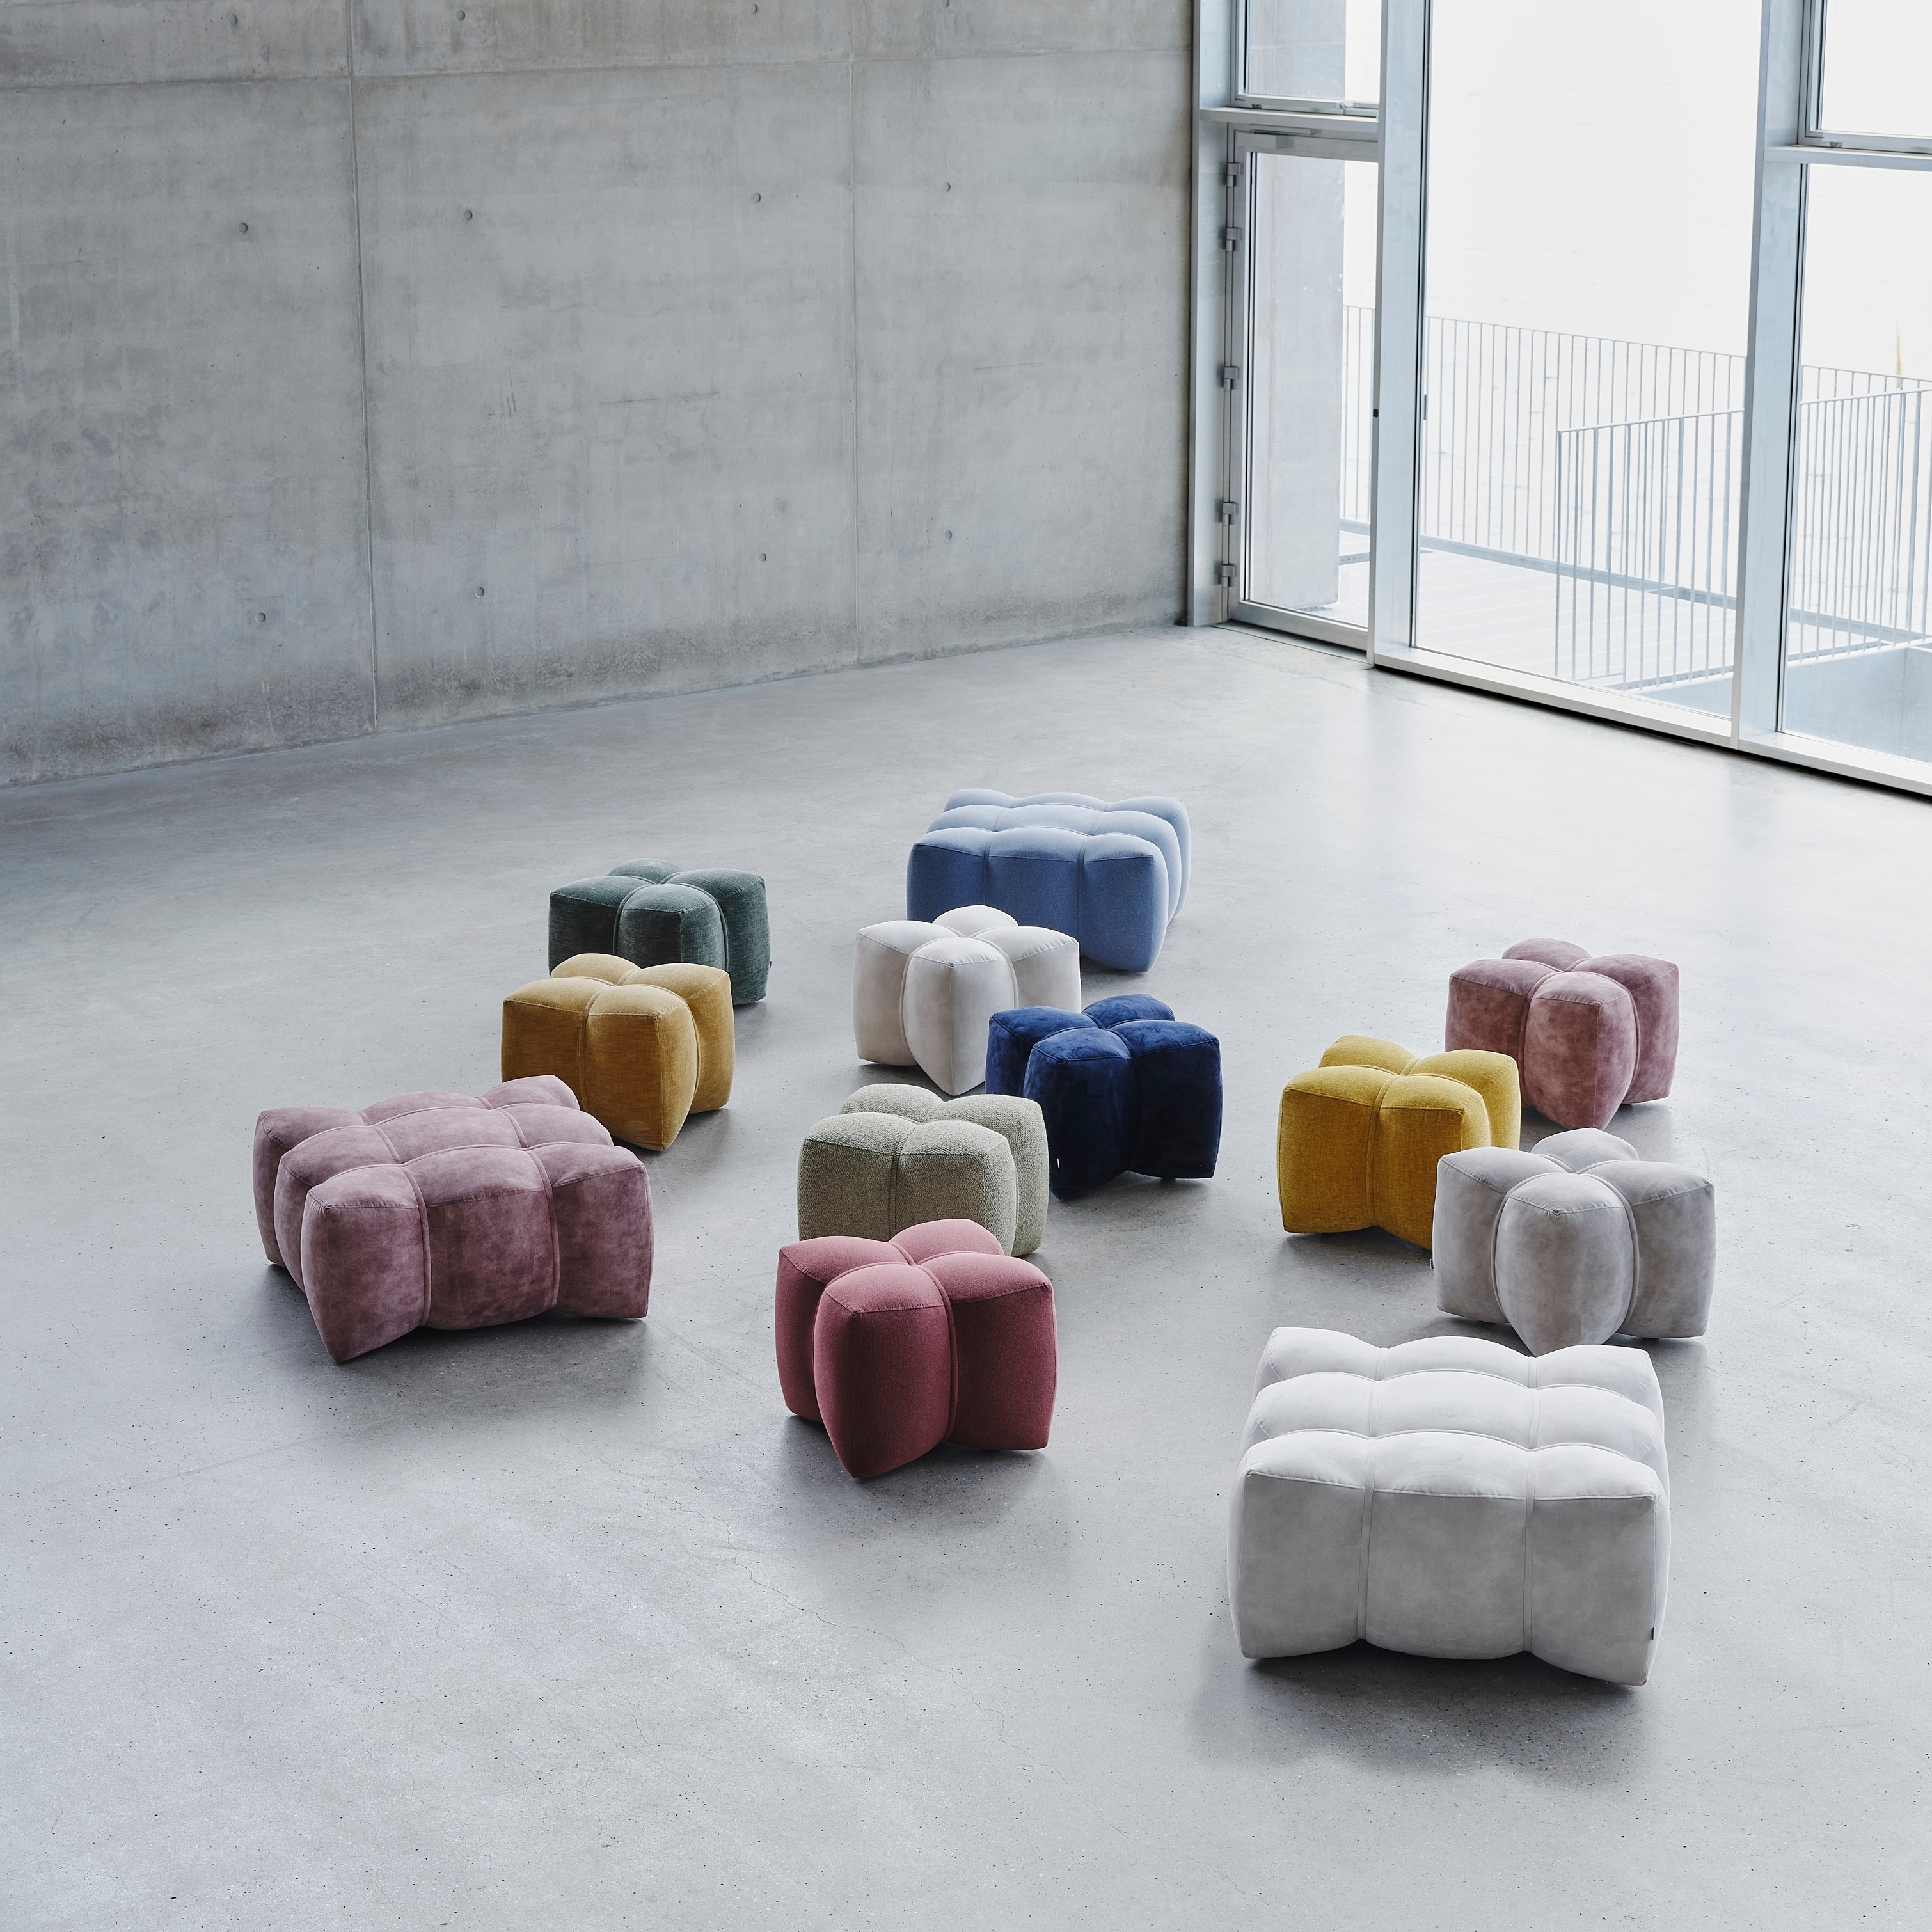 Variety of NaWABARI poufs in a modern, airy space with concrete walls and daylight.